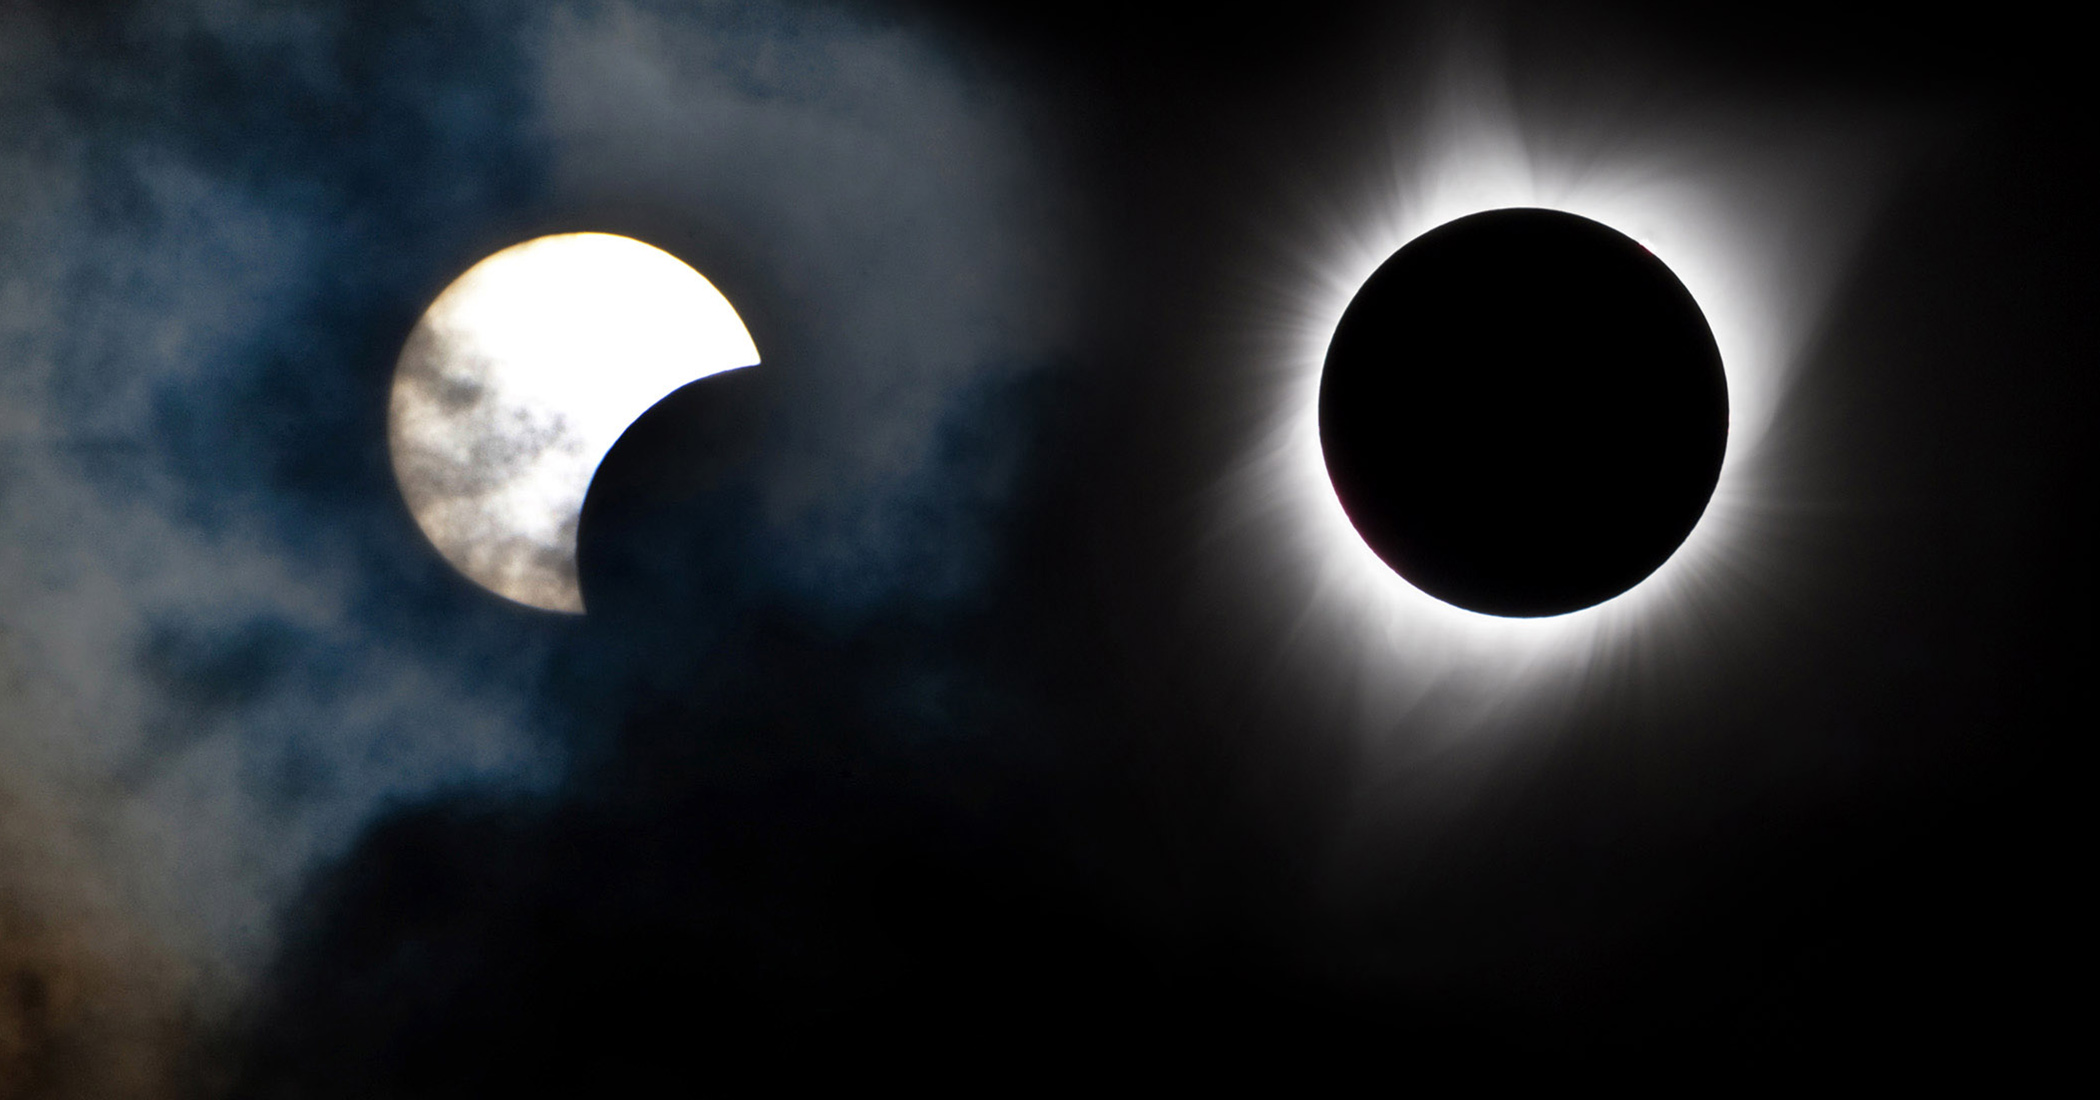 UltraRare Hybrid Solar Eclipse to Grace the Heavens April 19—One of